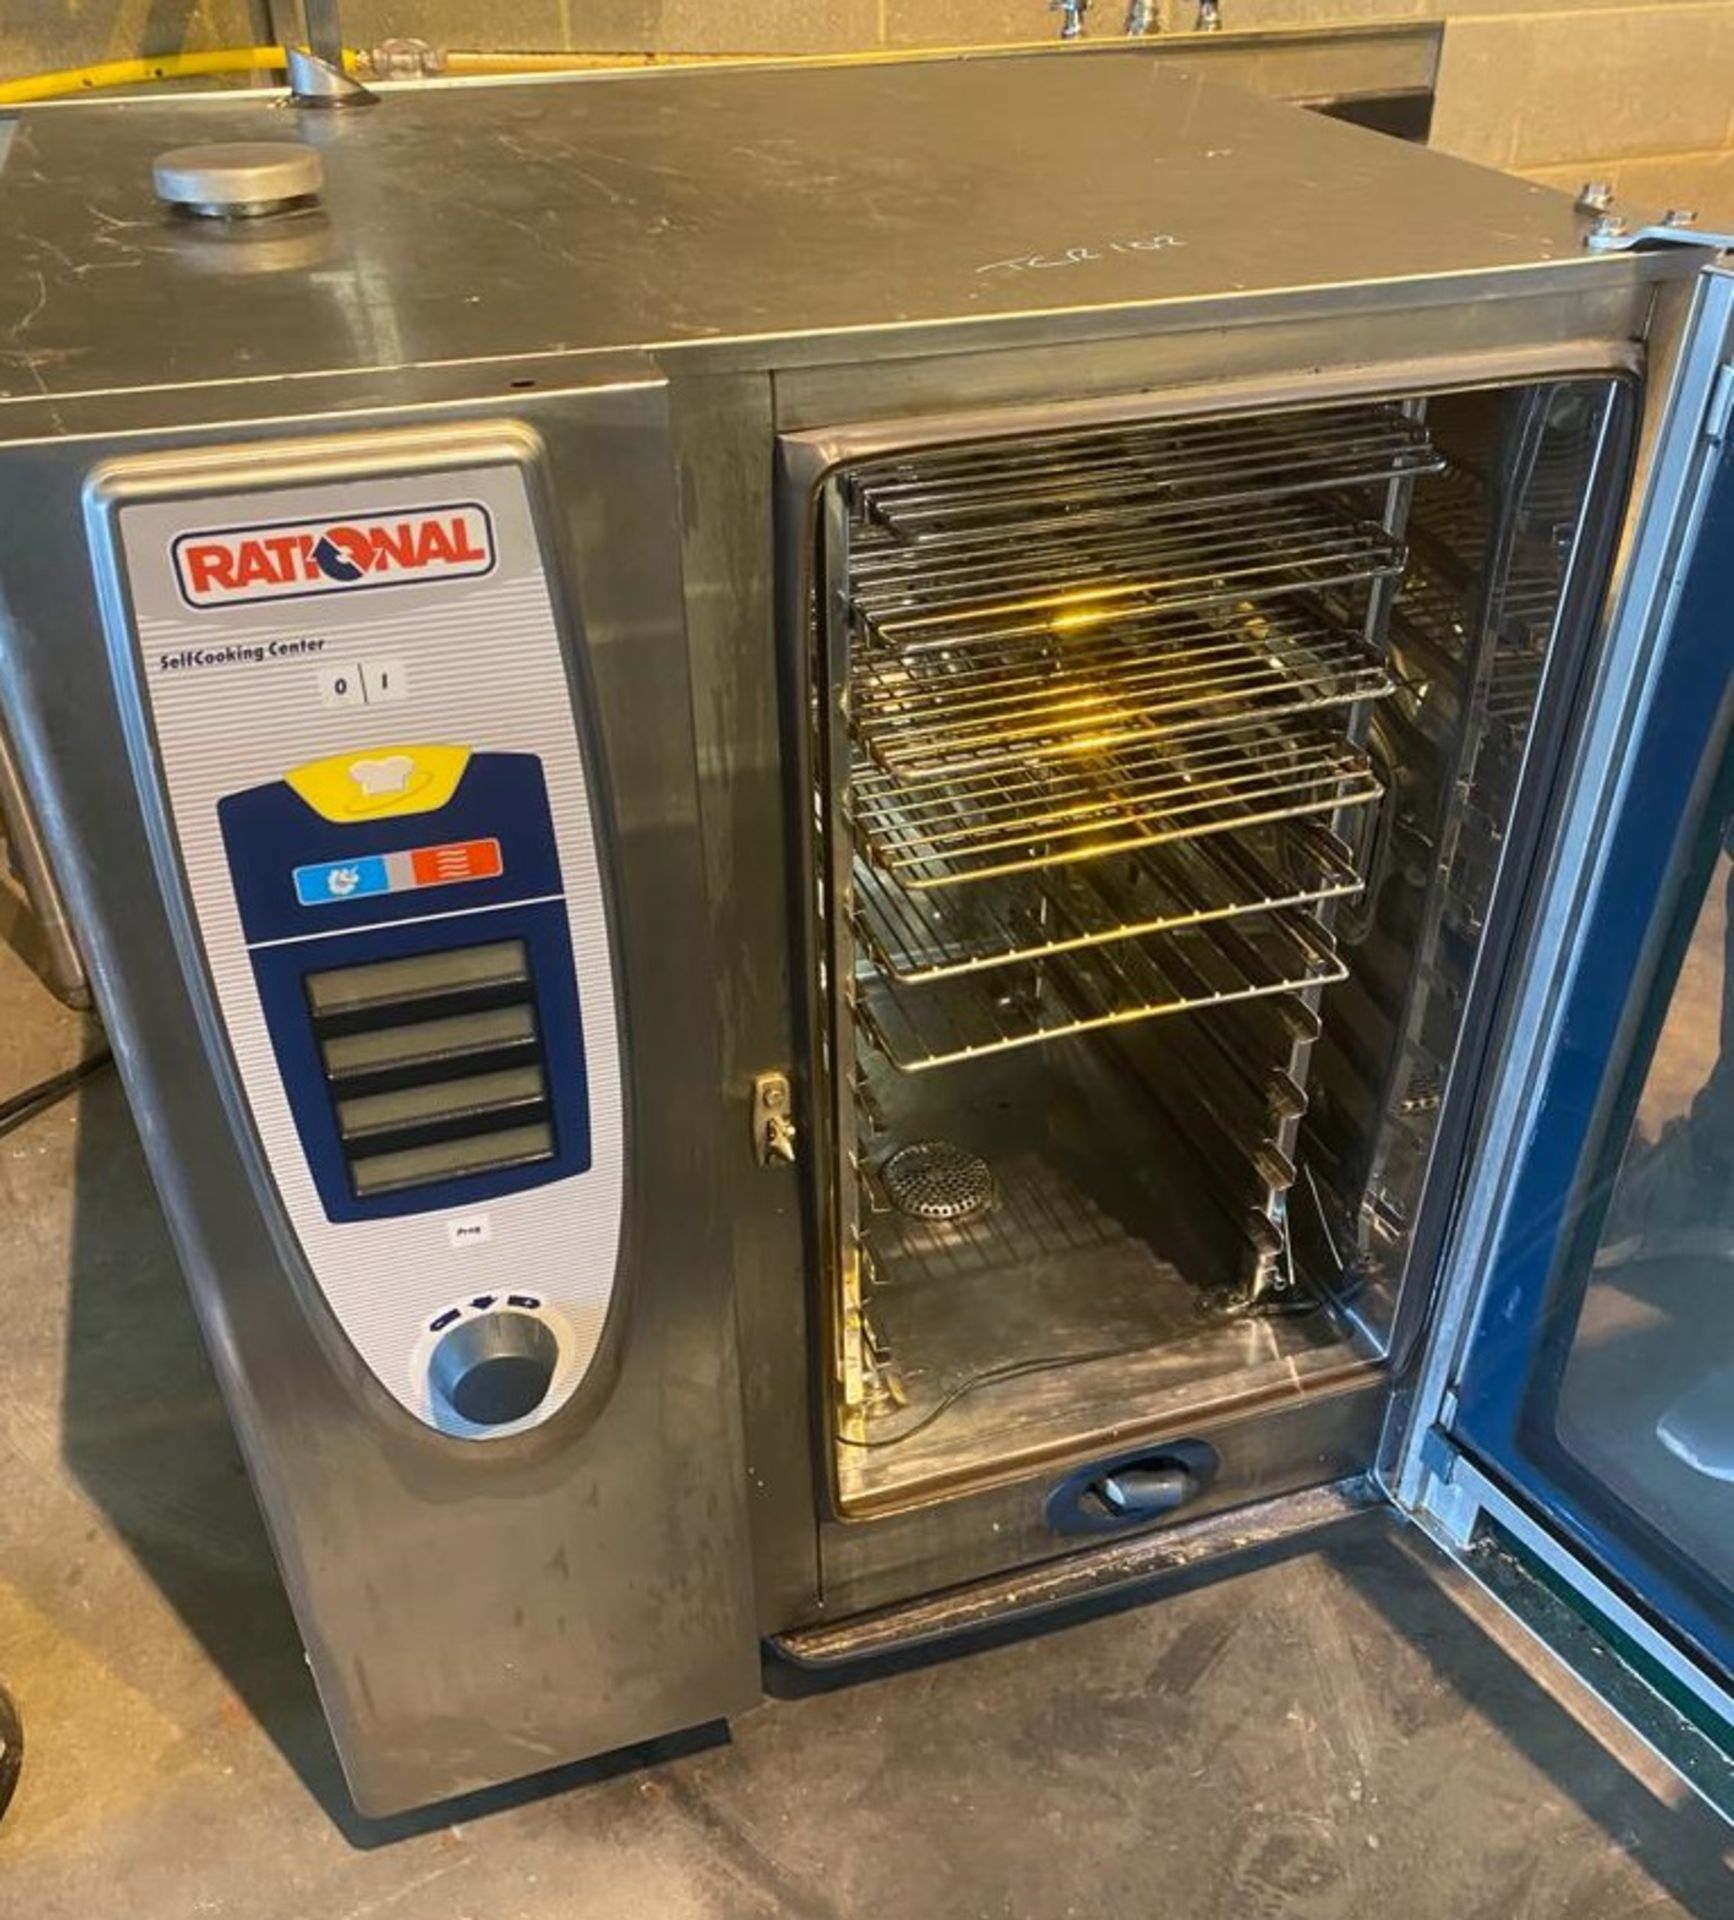 1 x Rational 10 Grid SCC101 Self Cooking Centre Combination Oven With Stand - 3 Phase - Image 11 of 11